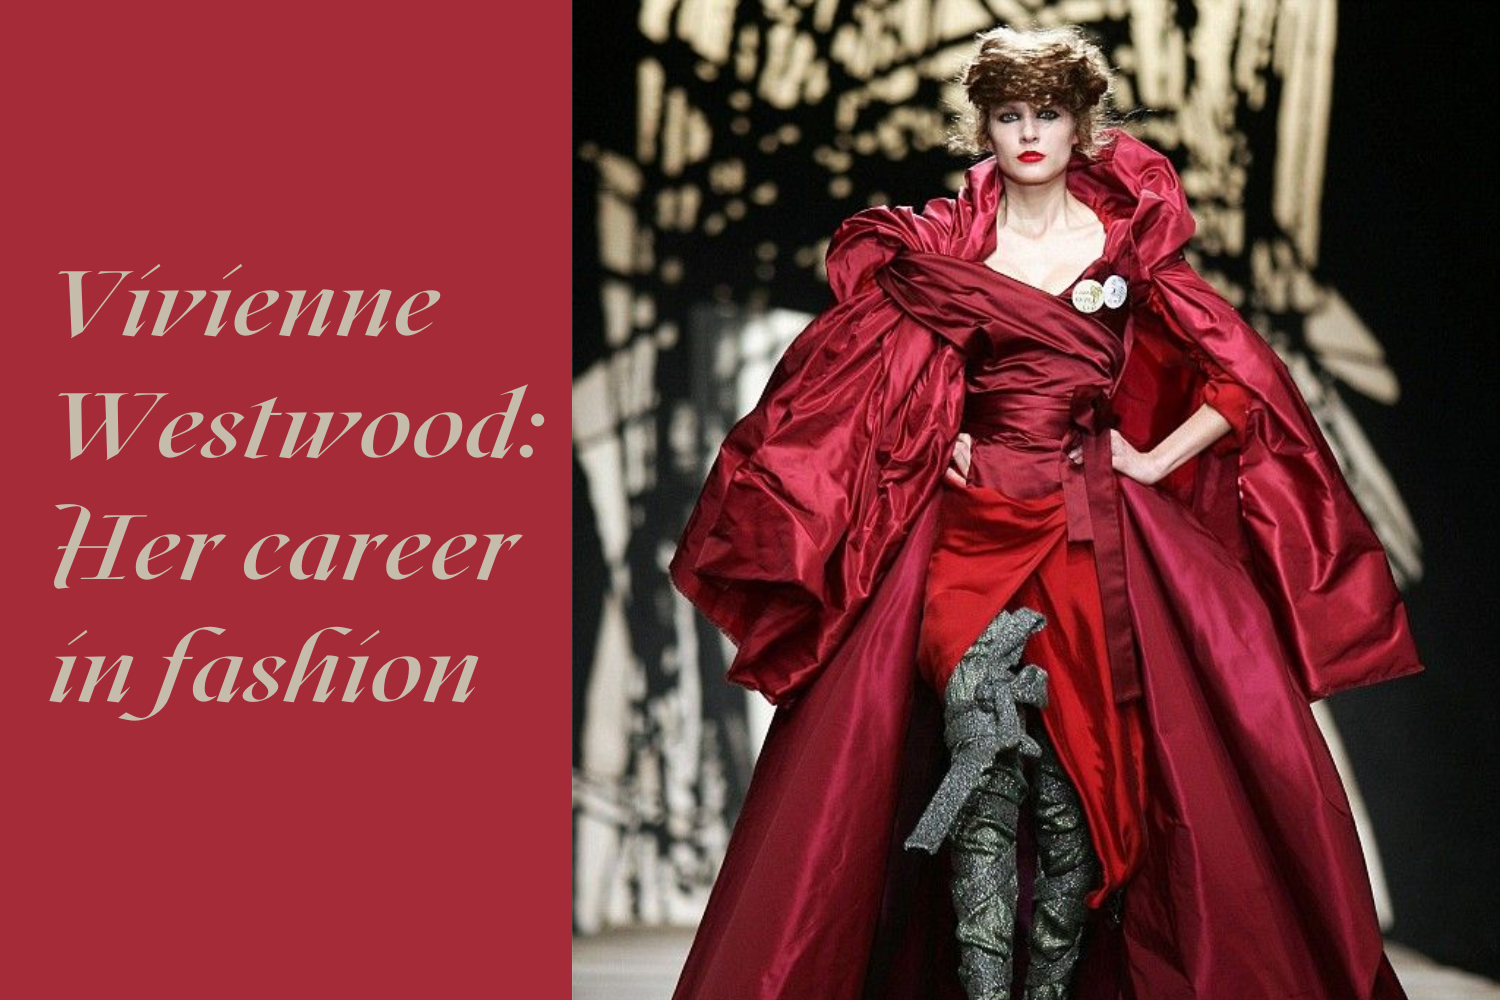 The Legacy of Vivienne Westwood on Fashion